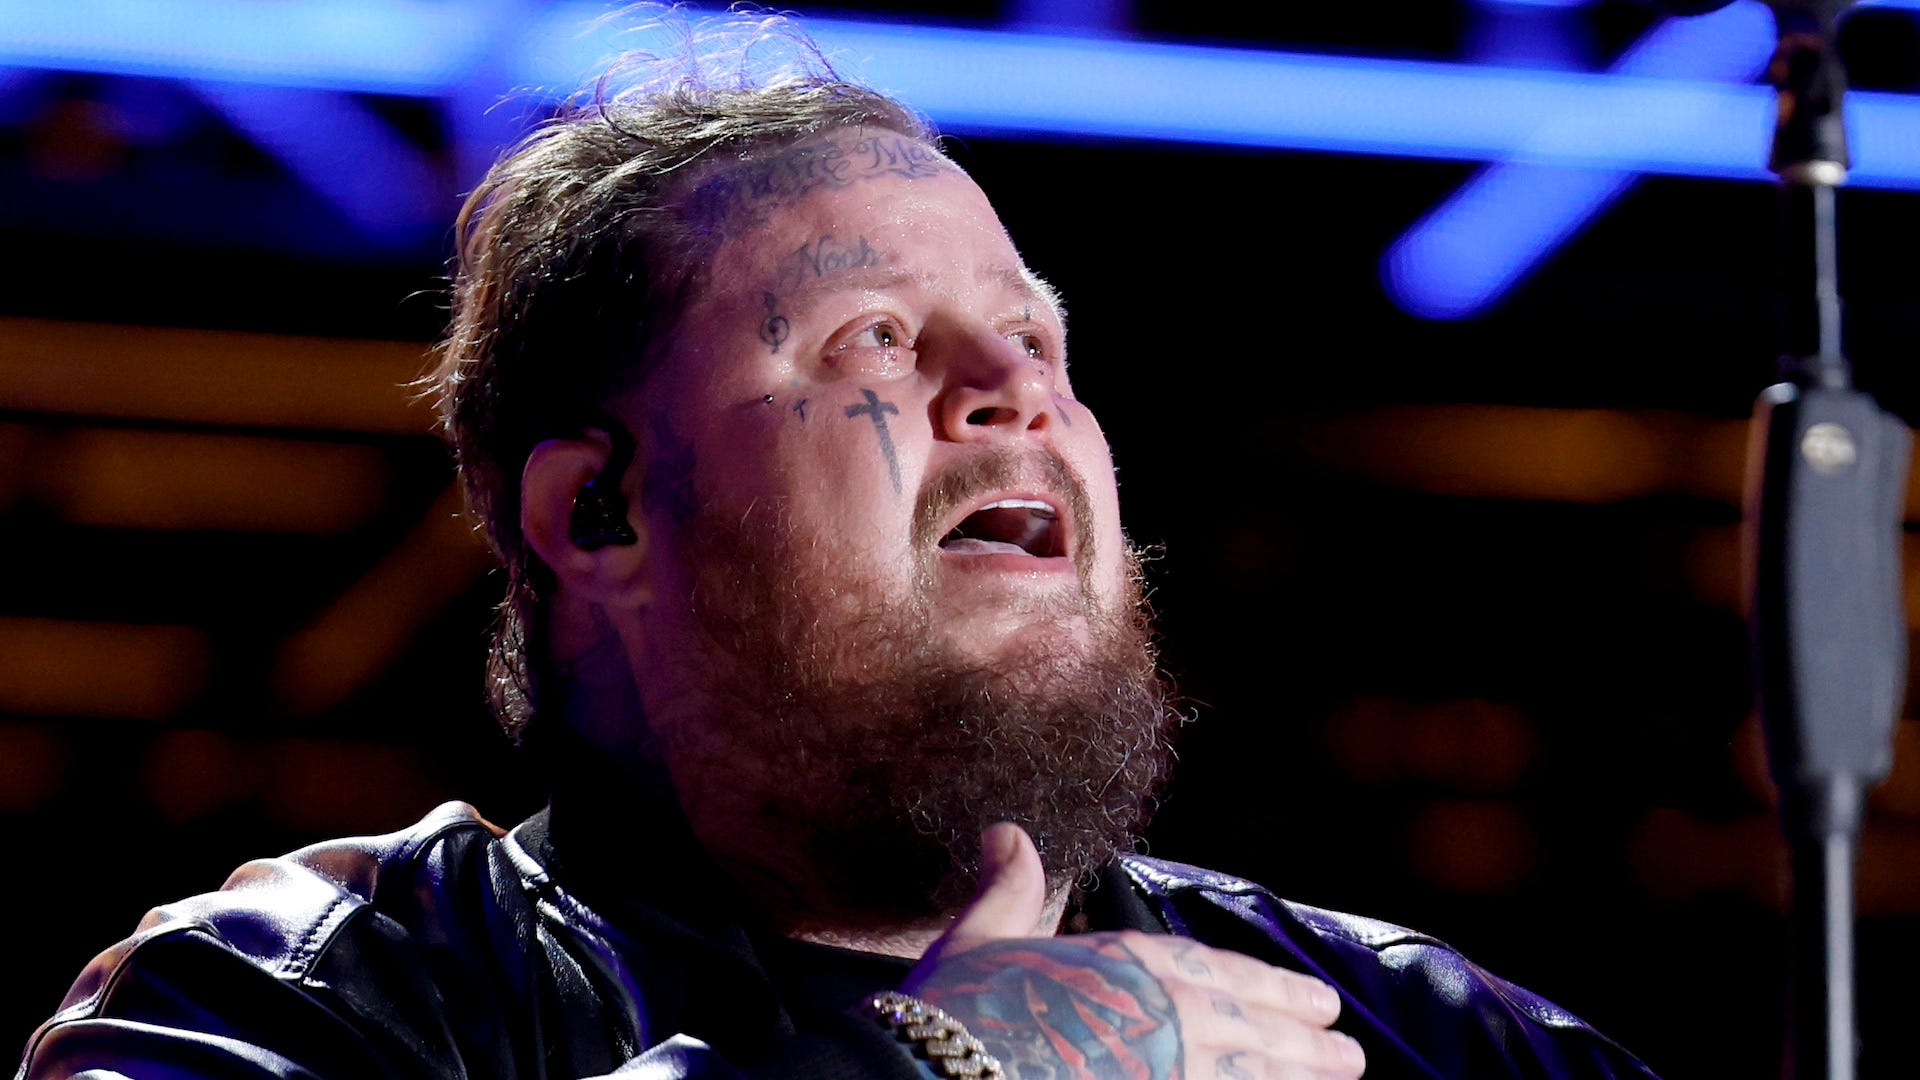 Jelly Roll bares his soul in new mental health-focused song [Video]